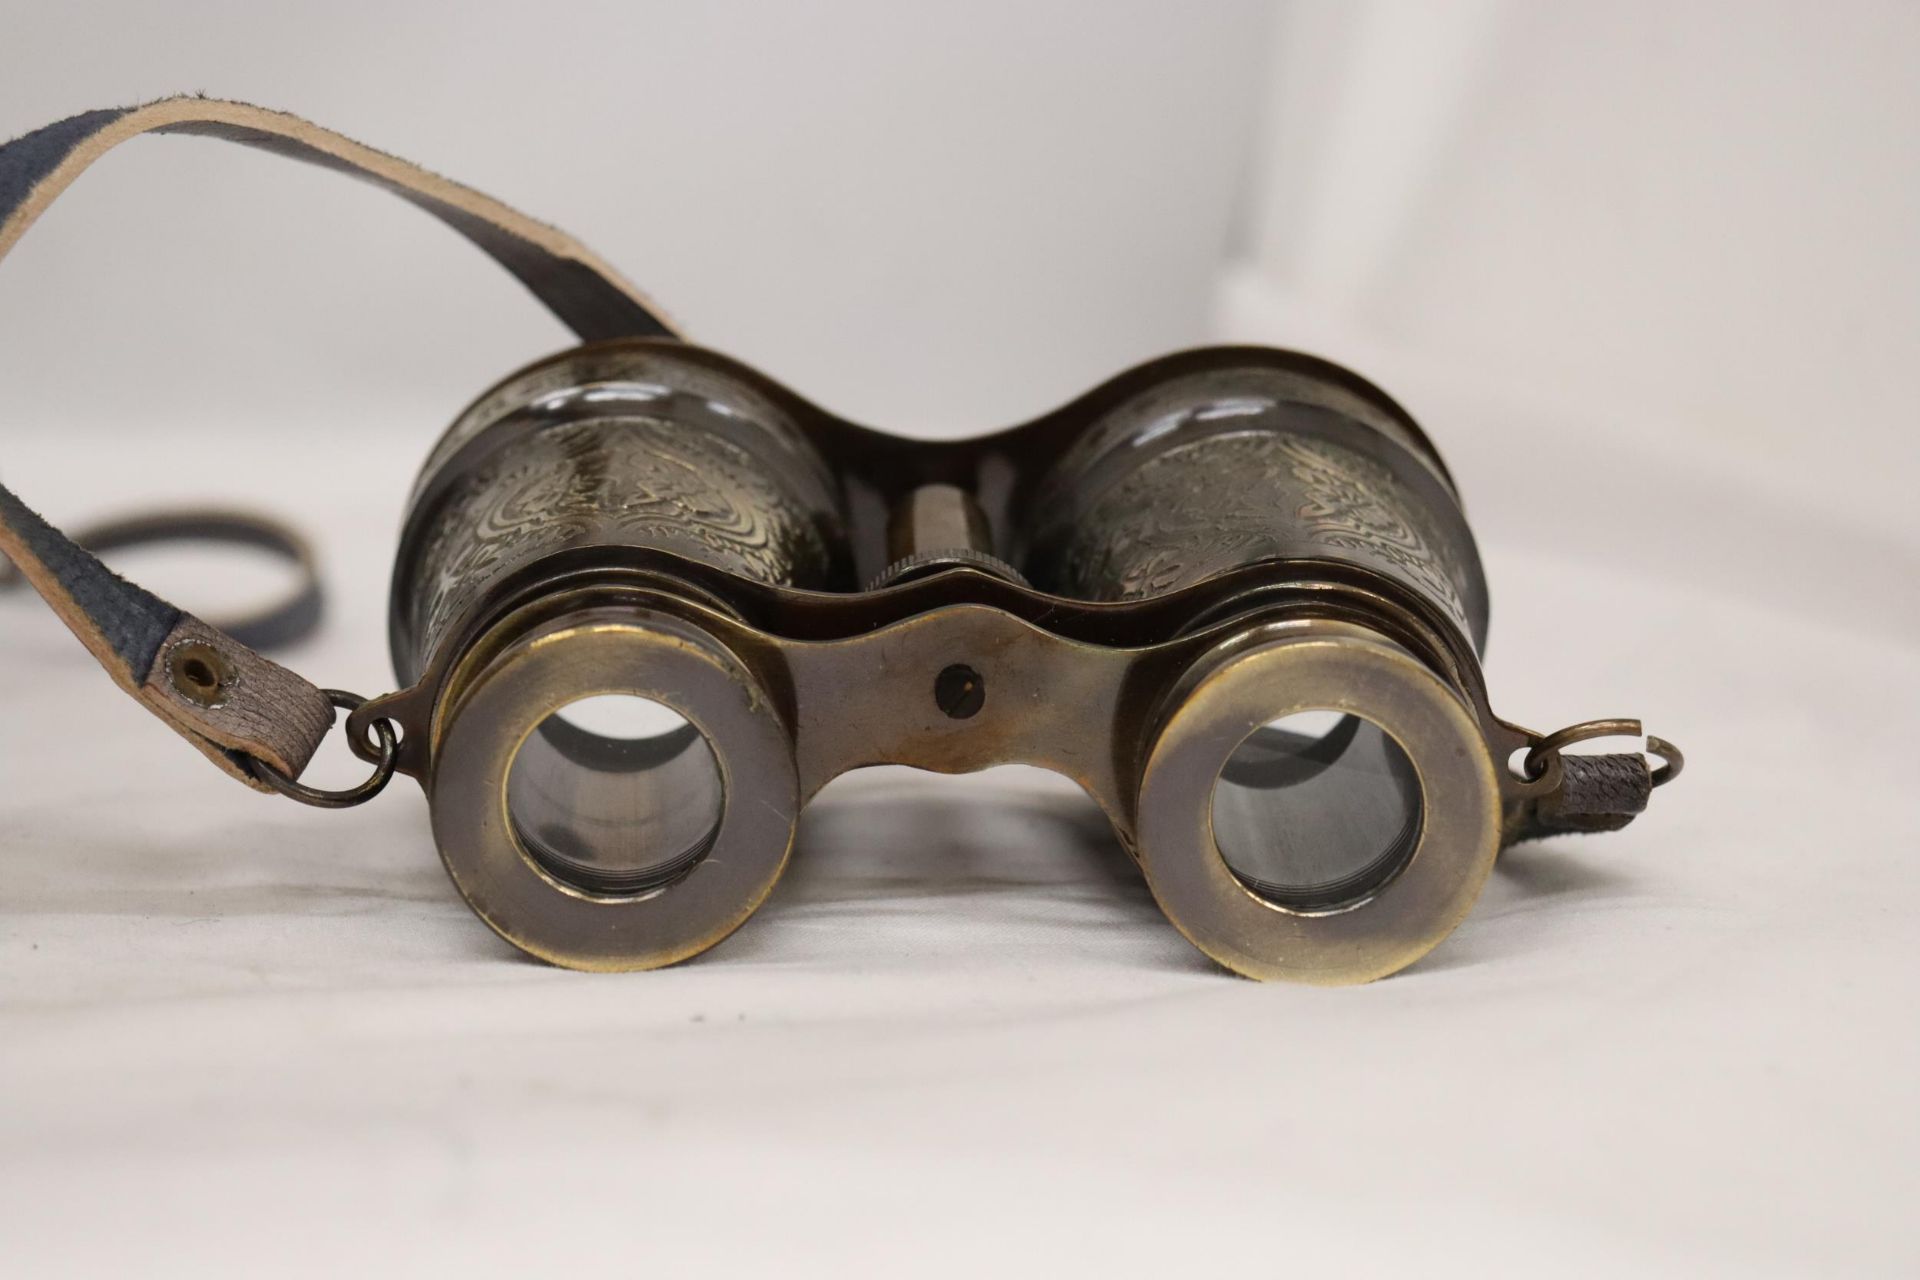 A PAIR OF BRASS BINOCULARS IN A LEATHER CASE - Image 4 of 5